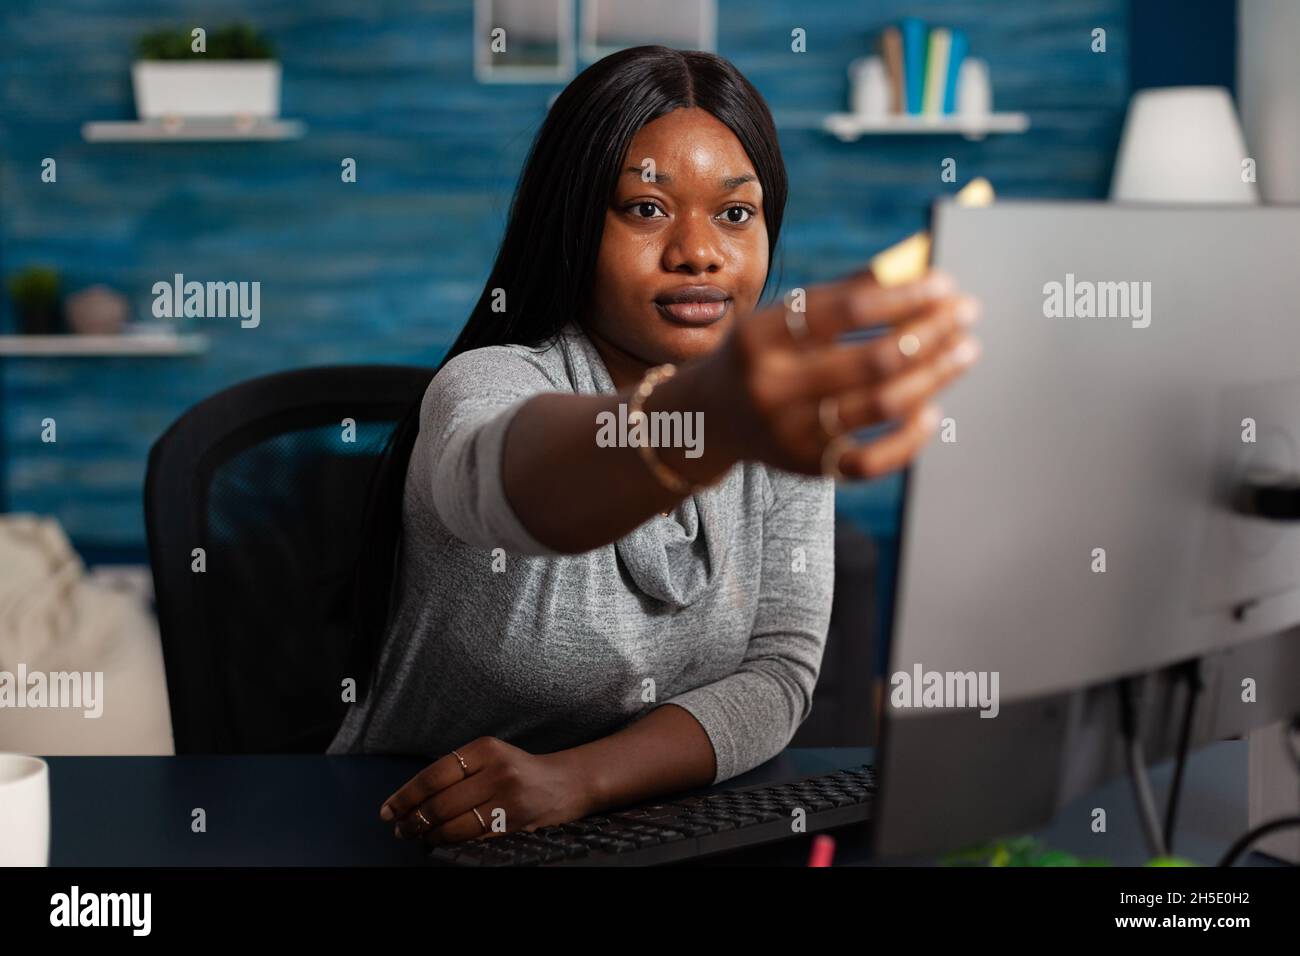 Adult putting sticky notes on monitor to work remotely. Young person using postit paper on computer to help with business project while working from home. Woman with adhesive note memo Stock Photo